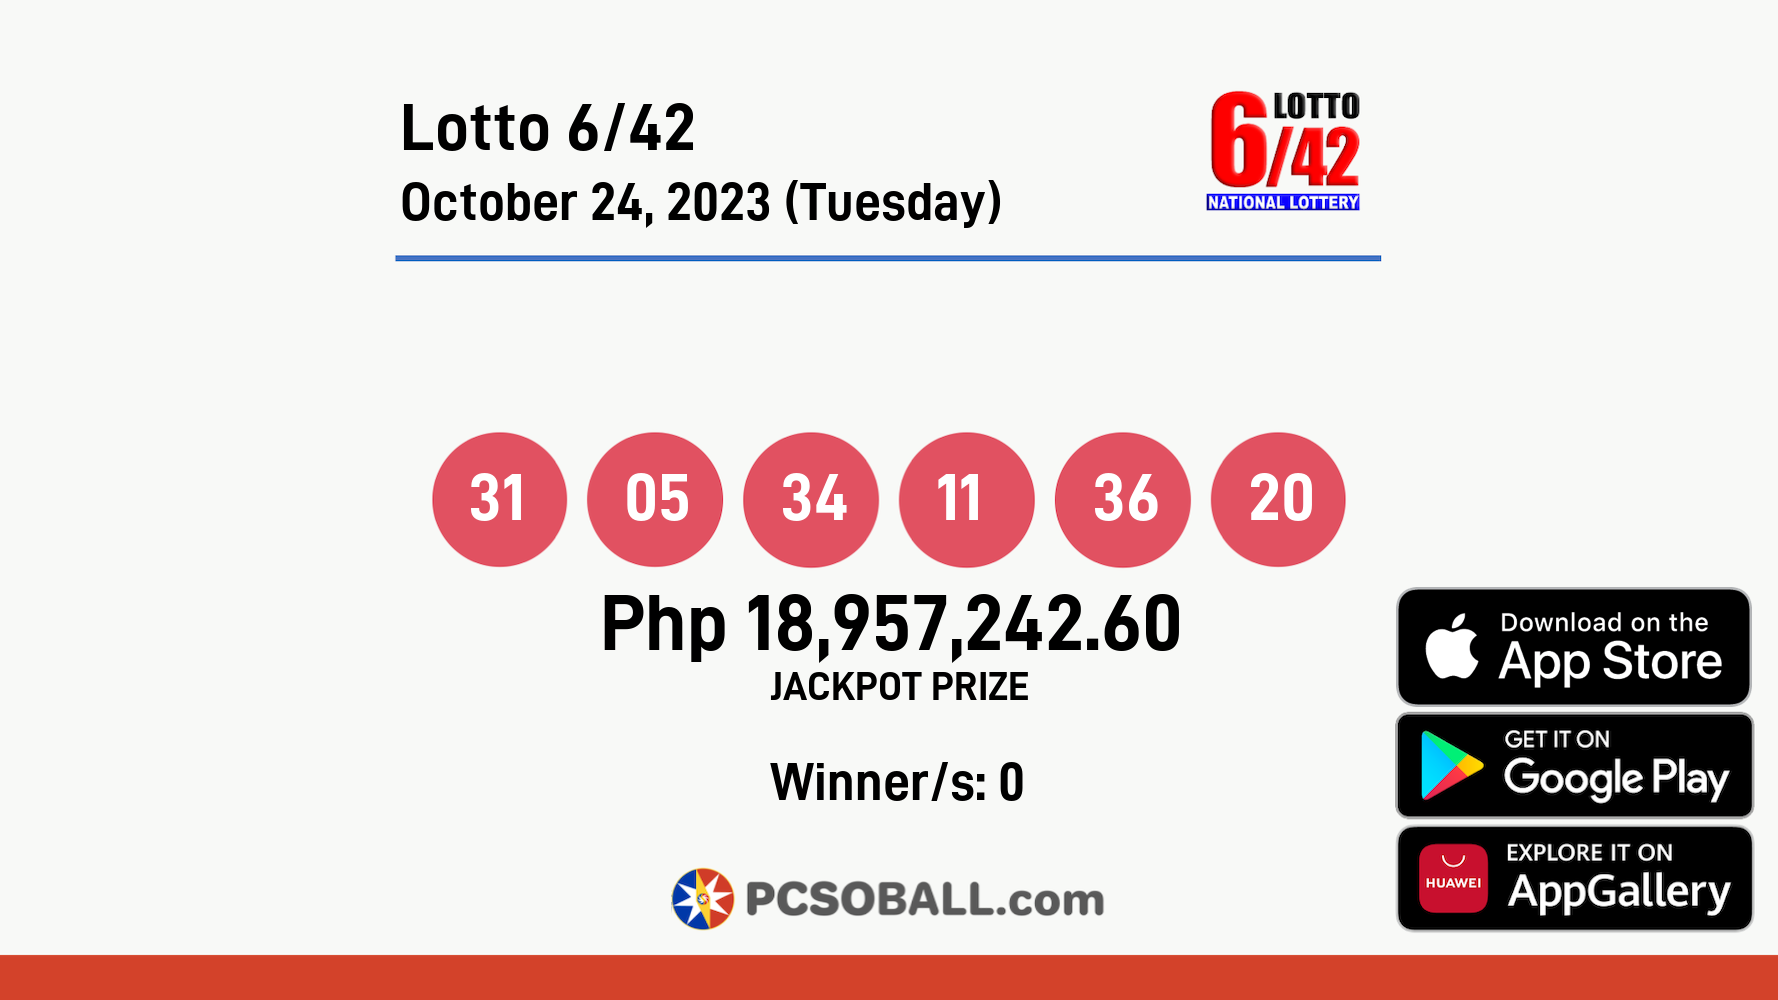 Lotto 6/42 October 24, 2023 (Tuesday) Result